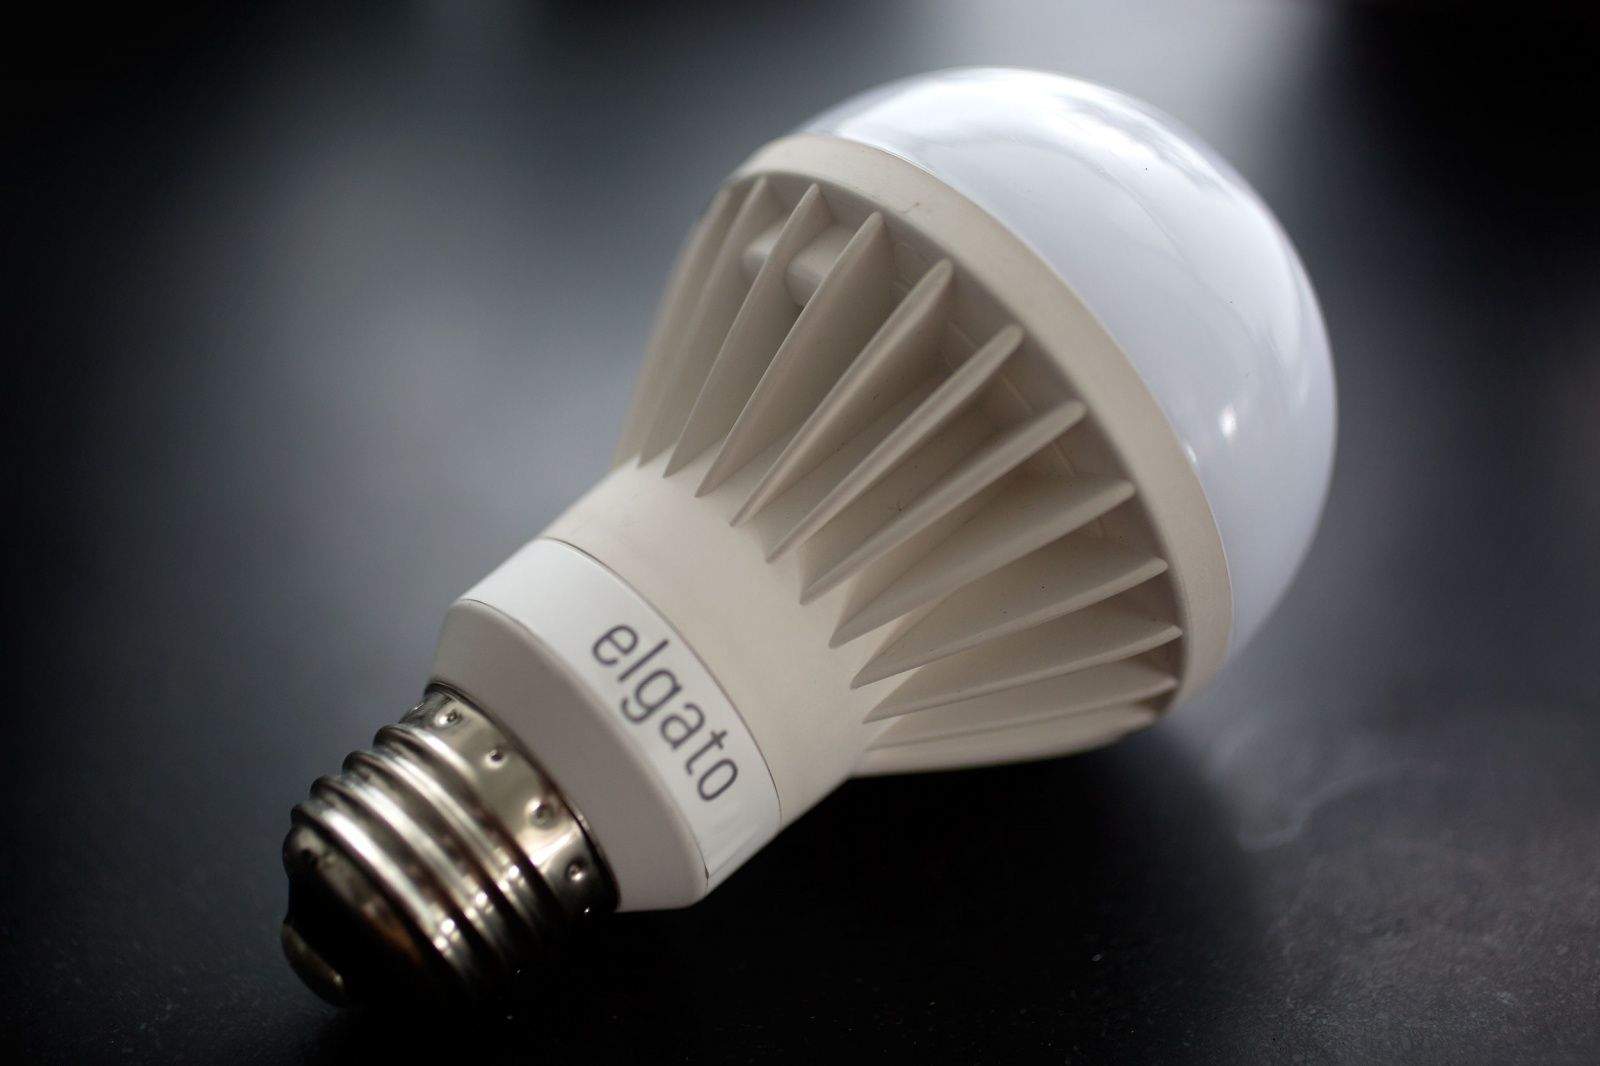 Elgato smart bulbs are well and great, but we want more.